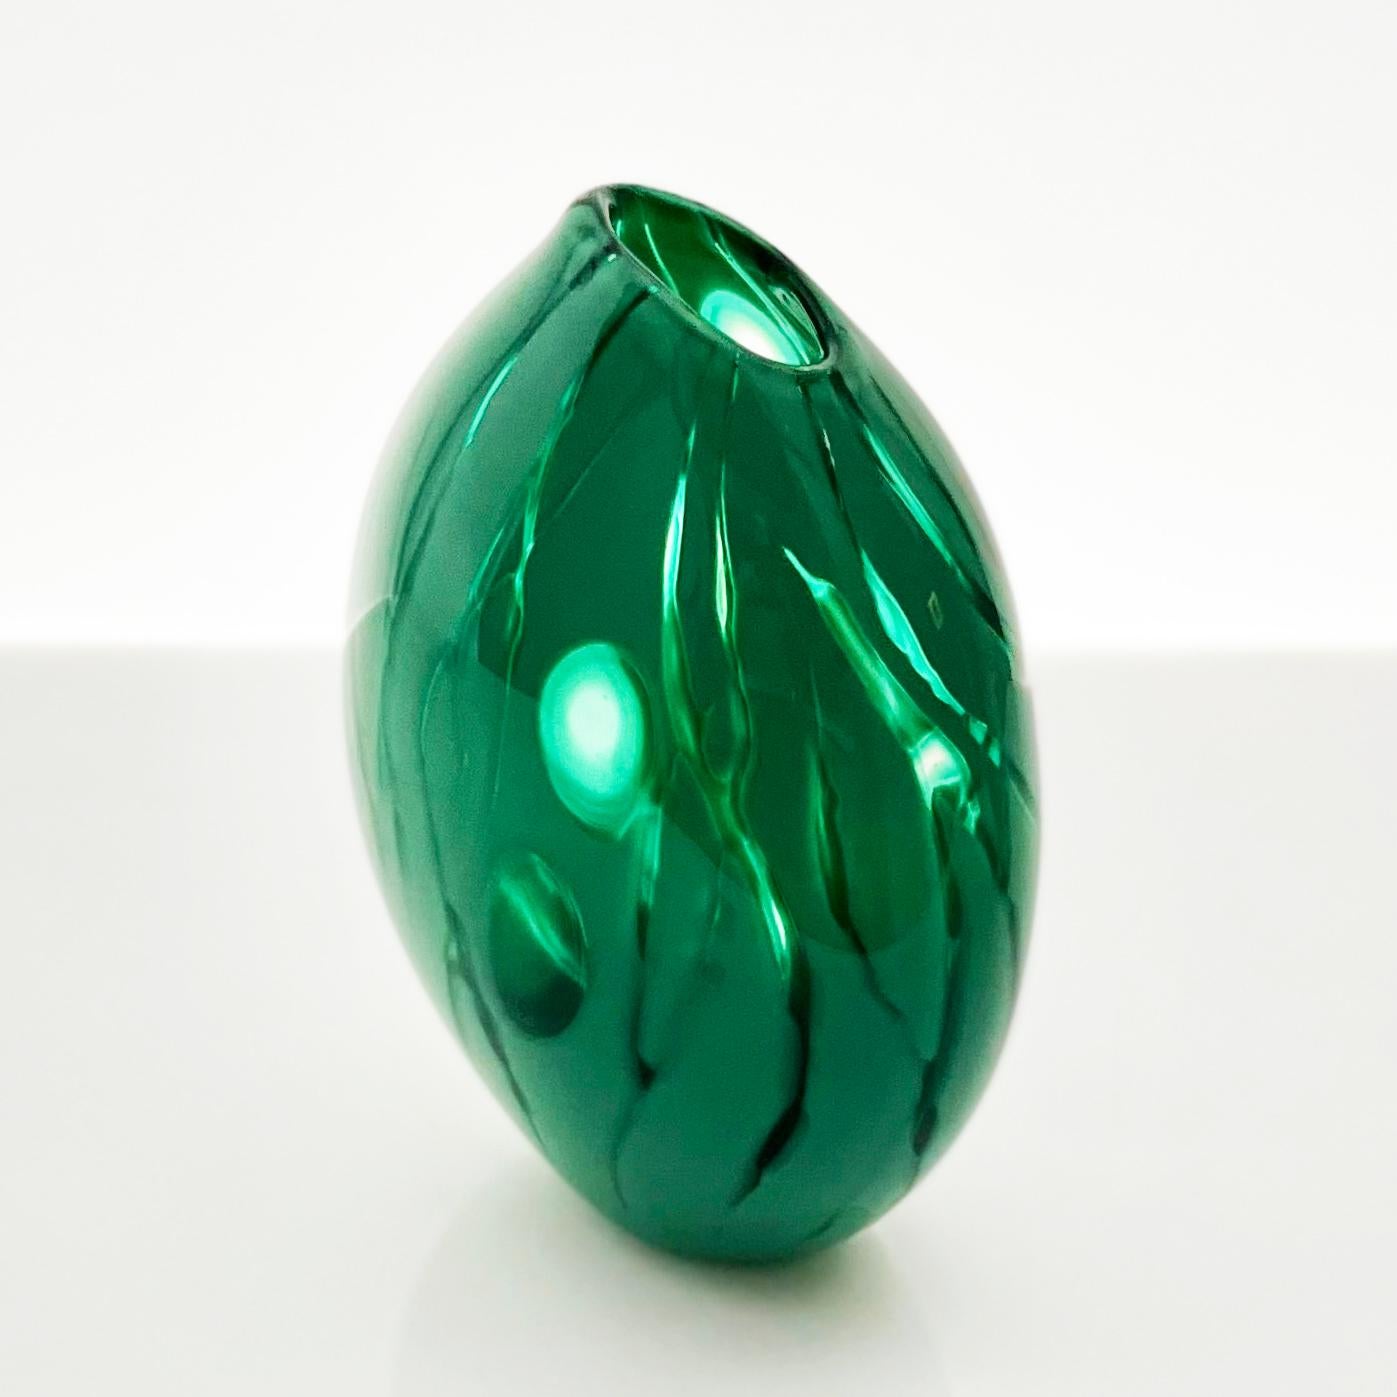 Engraved Emerald Green Glass Pod vessel, unique, handmade by Michèle Oberdieck For Sale